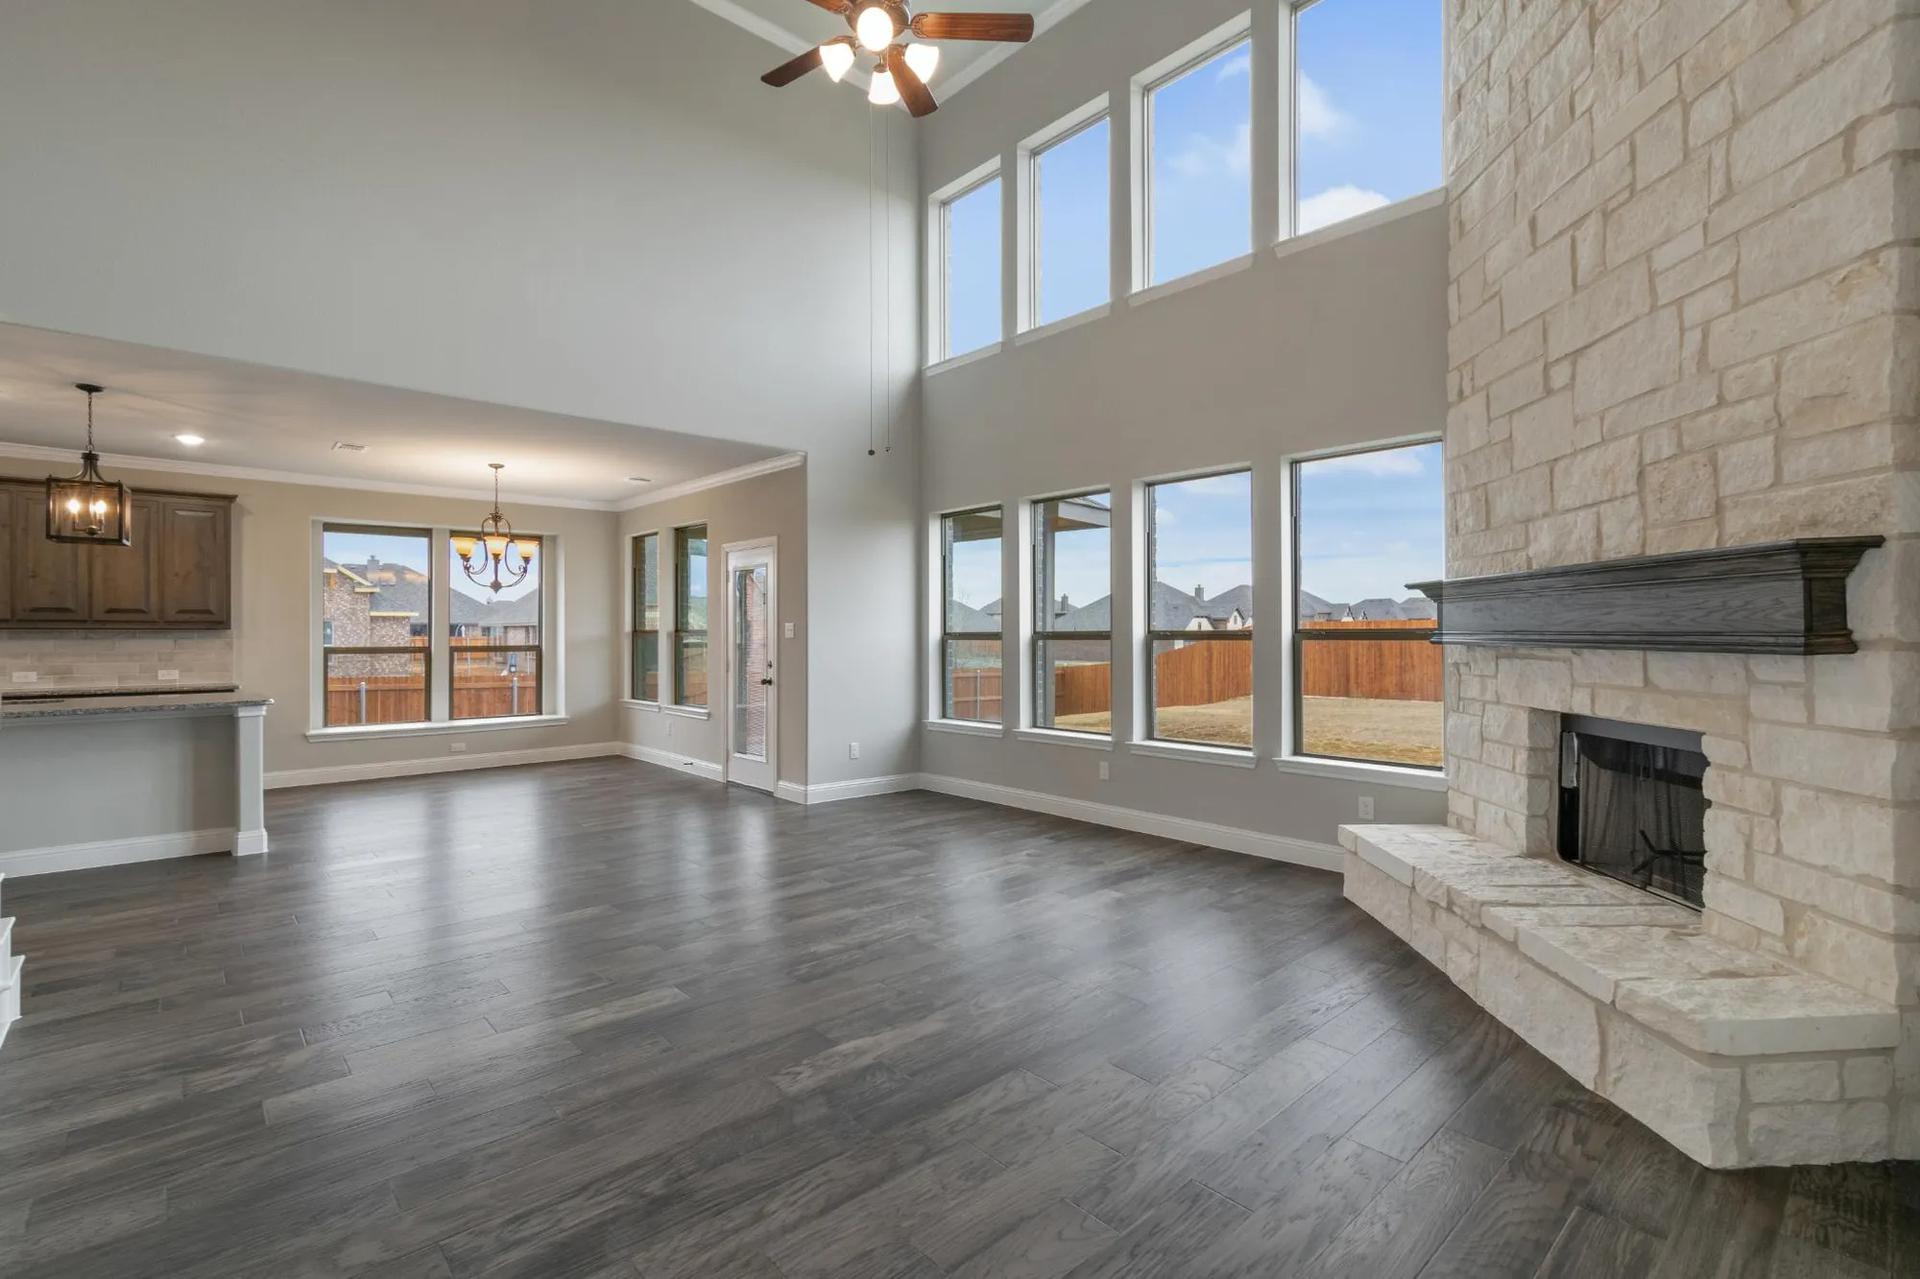 4br New Home in Waxahachie, TX